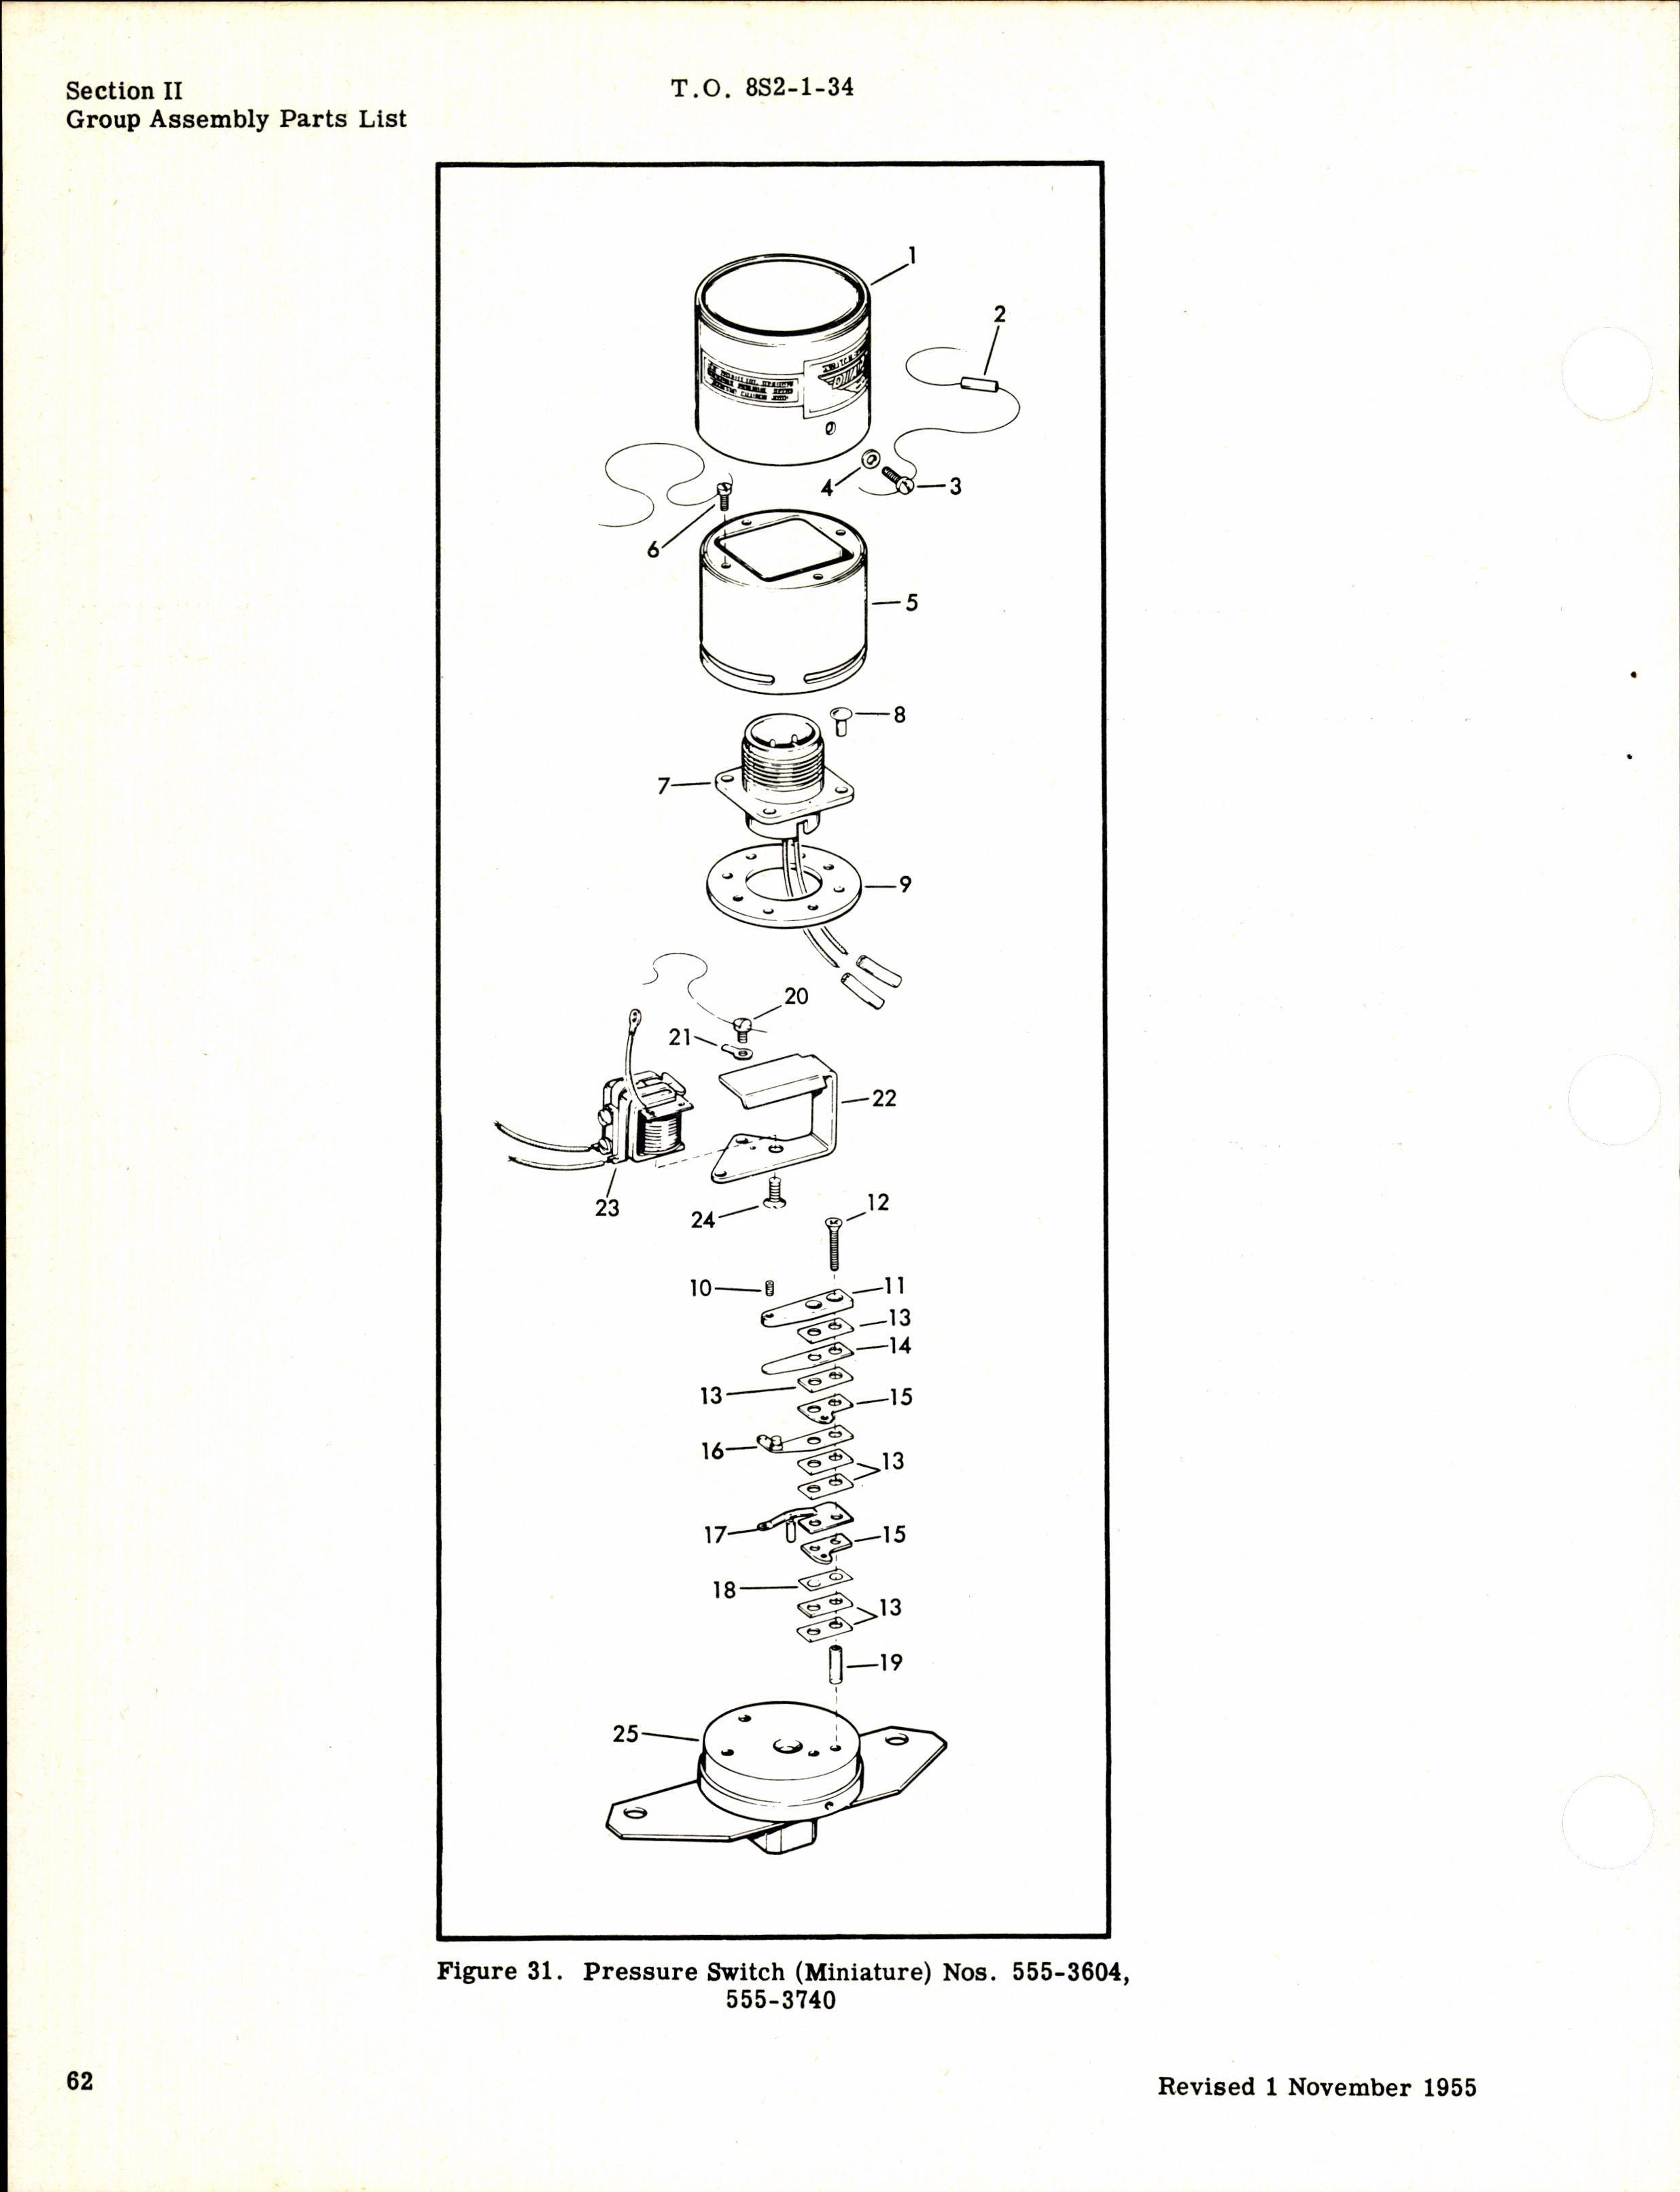 Sample page 10 from AirCorps Library document: Parts Catalog for Cook Pressure Control Switches